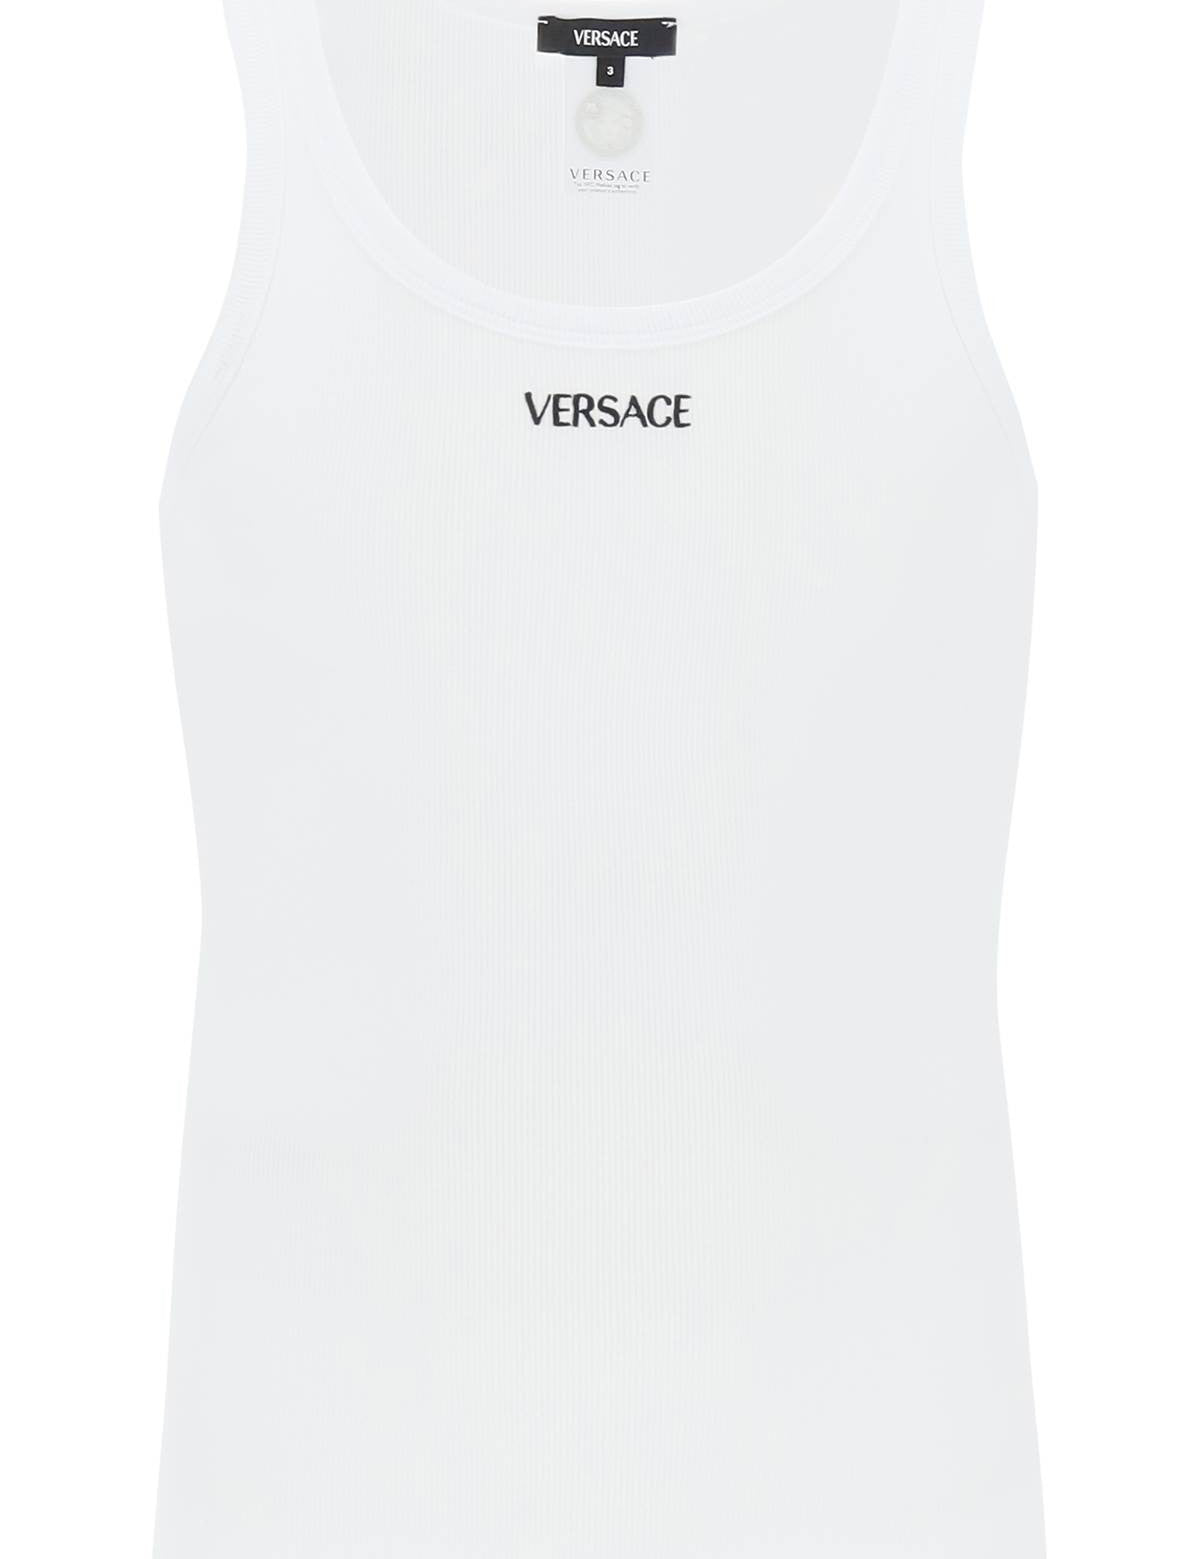 versace-intimate-tank-top-with-embroidered.jpg